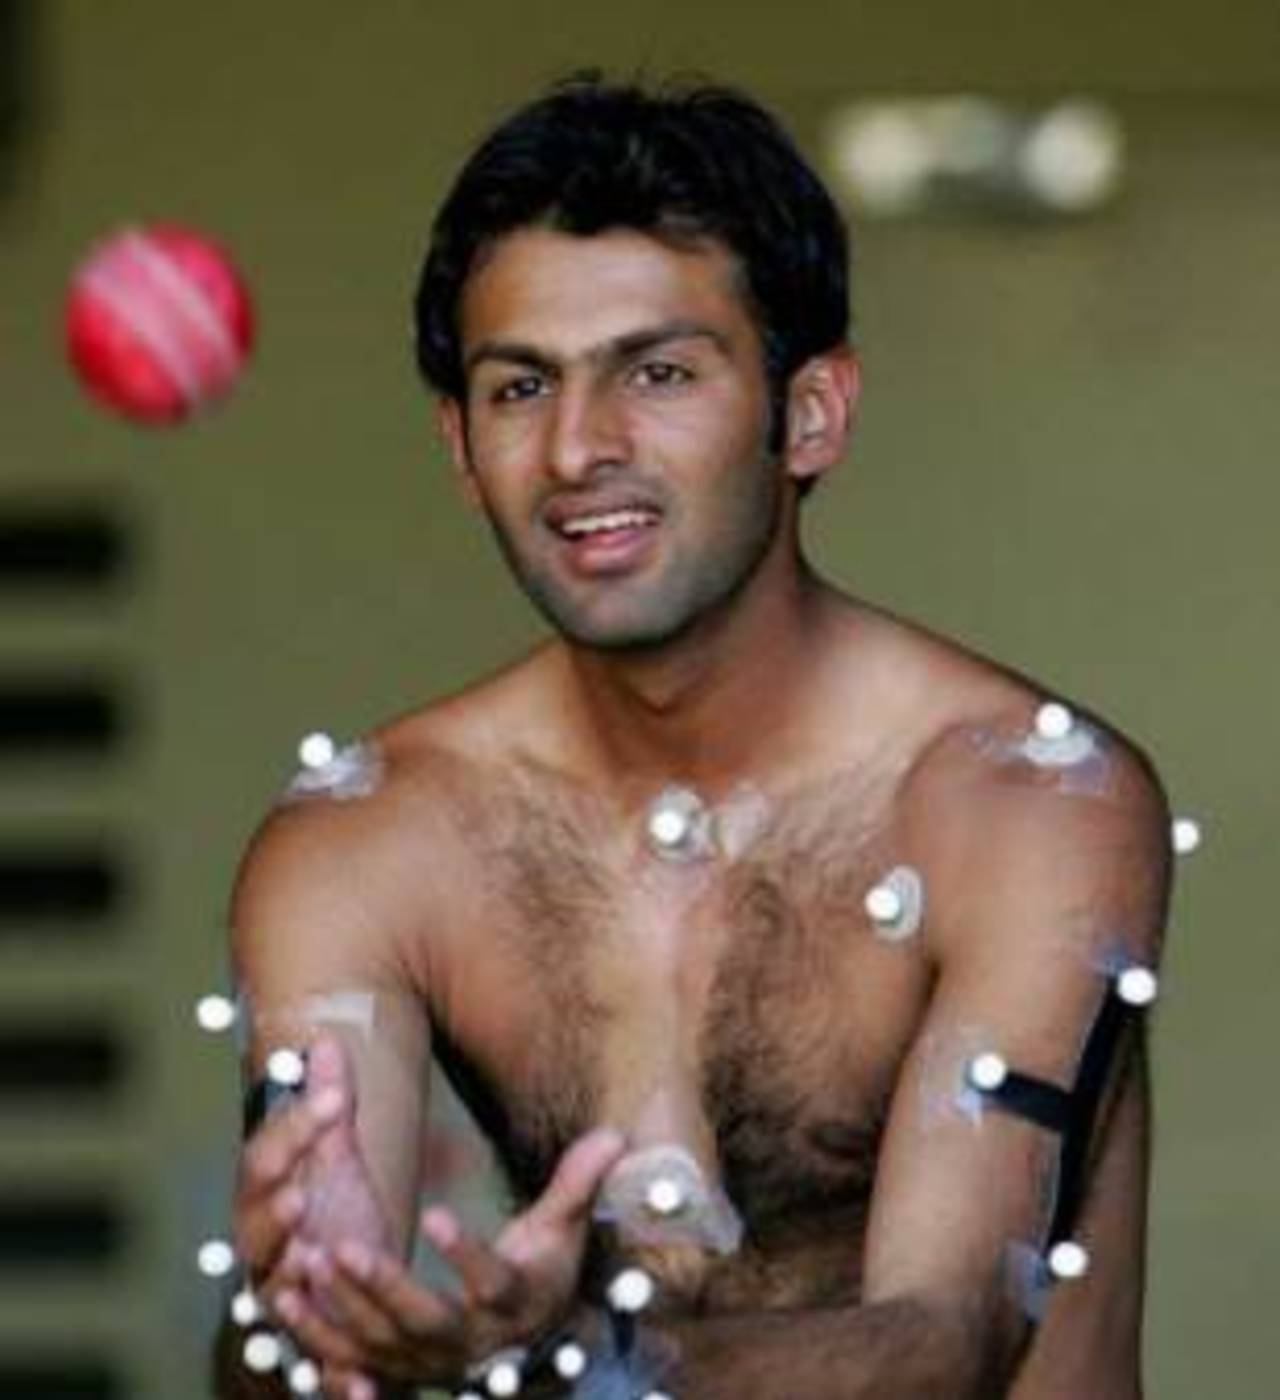 Shoaib Malik is tested by biomechanists at the University of Western Australia in Perth, December 13, 2004